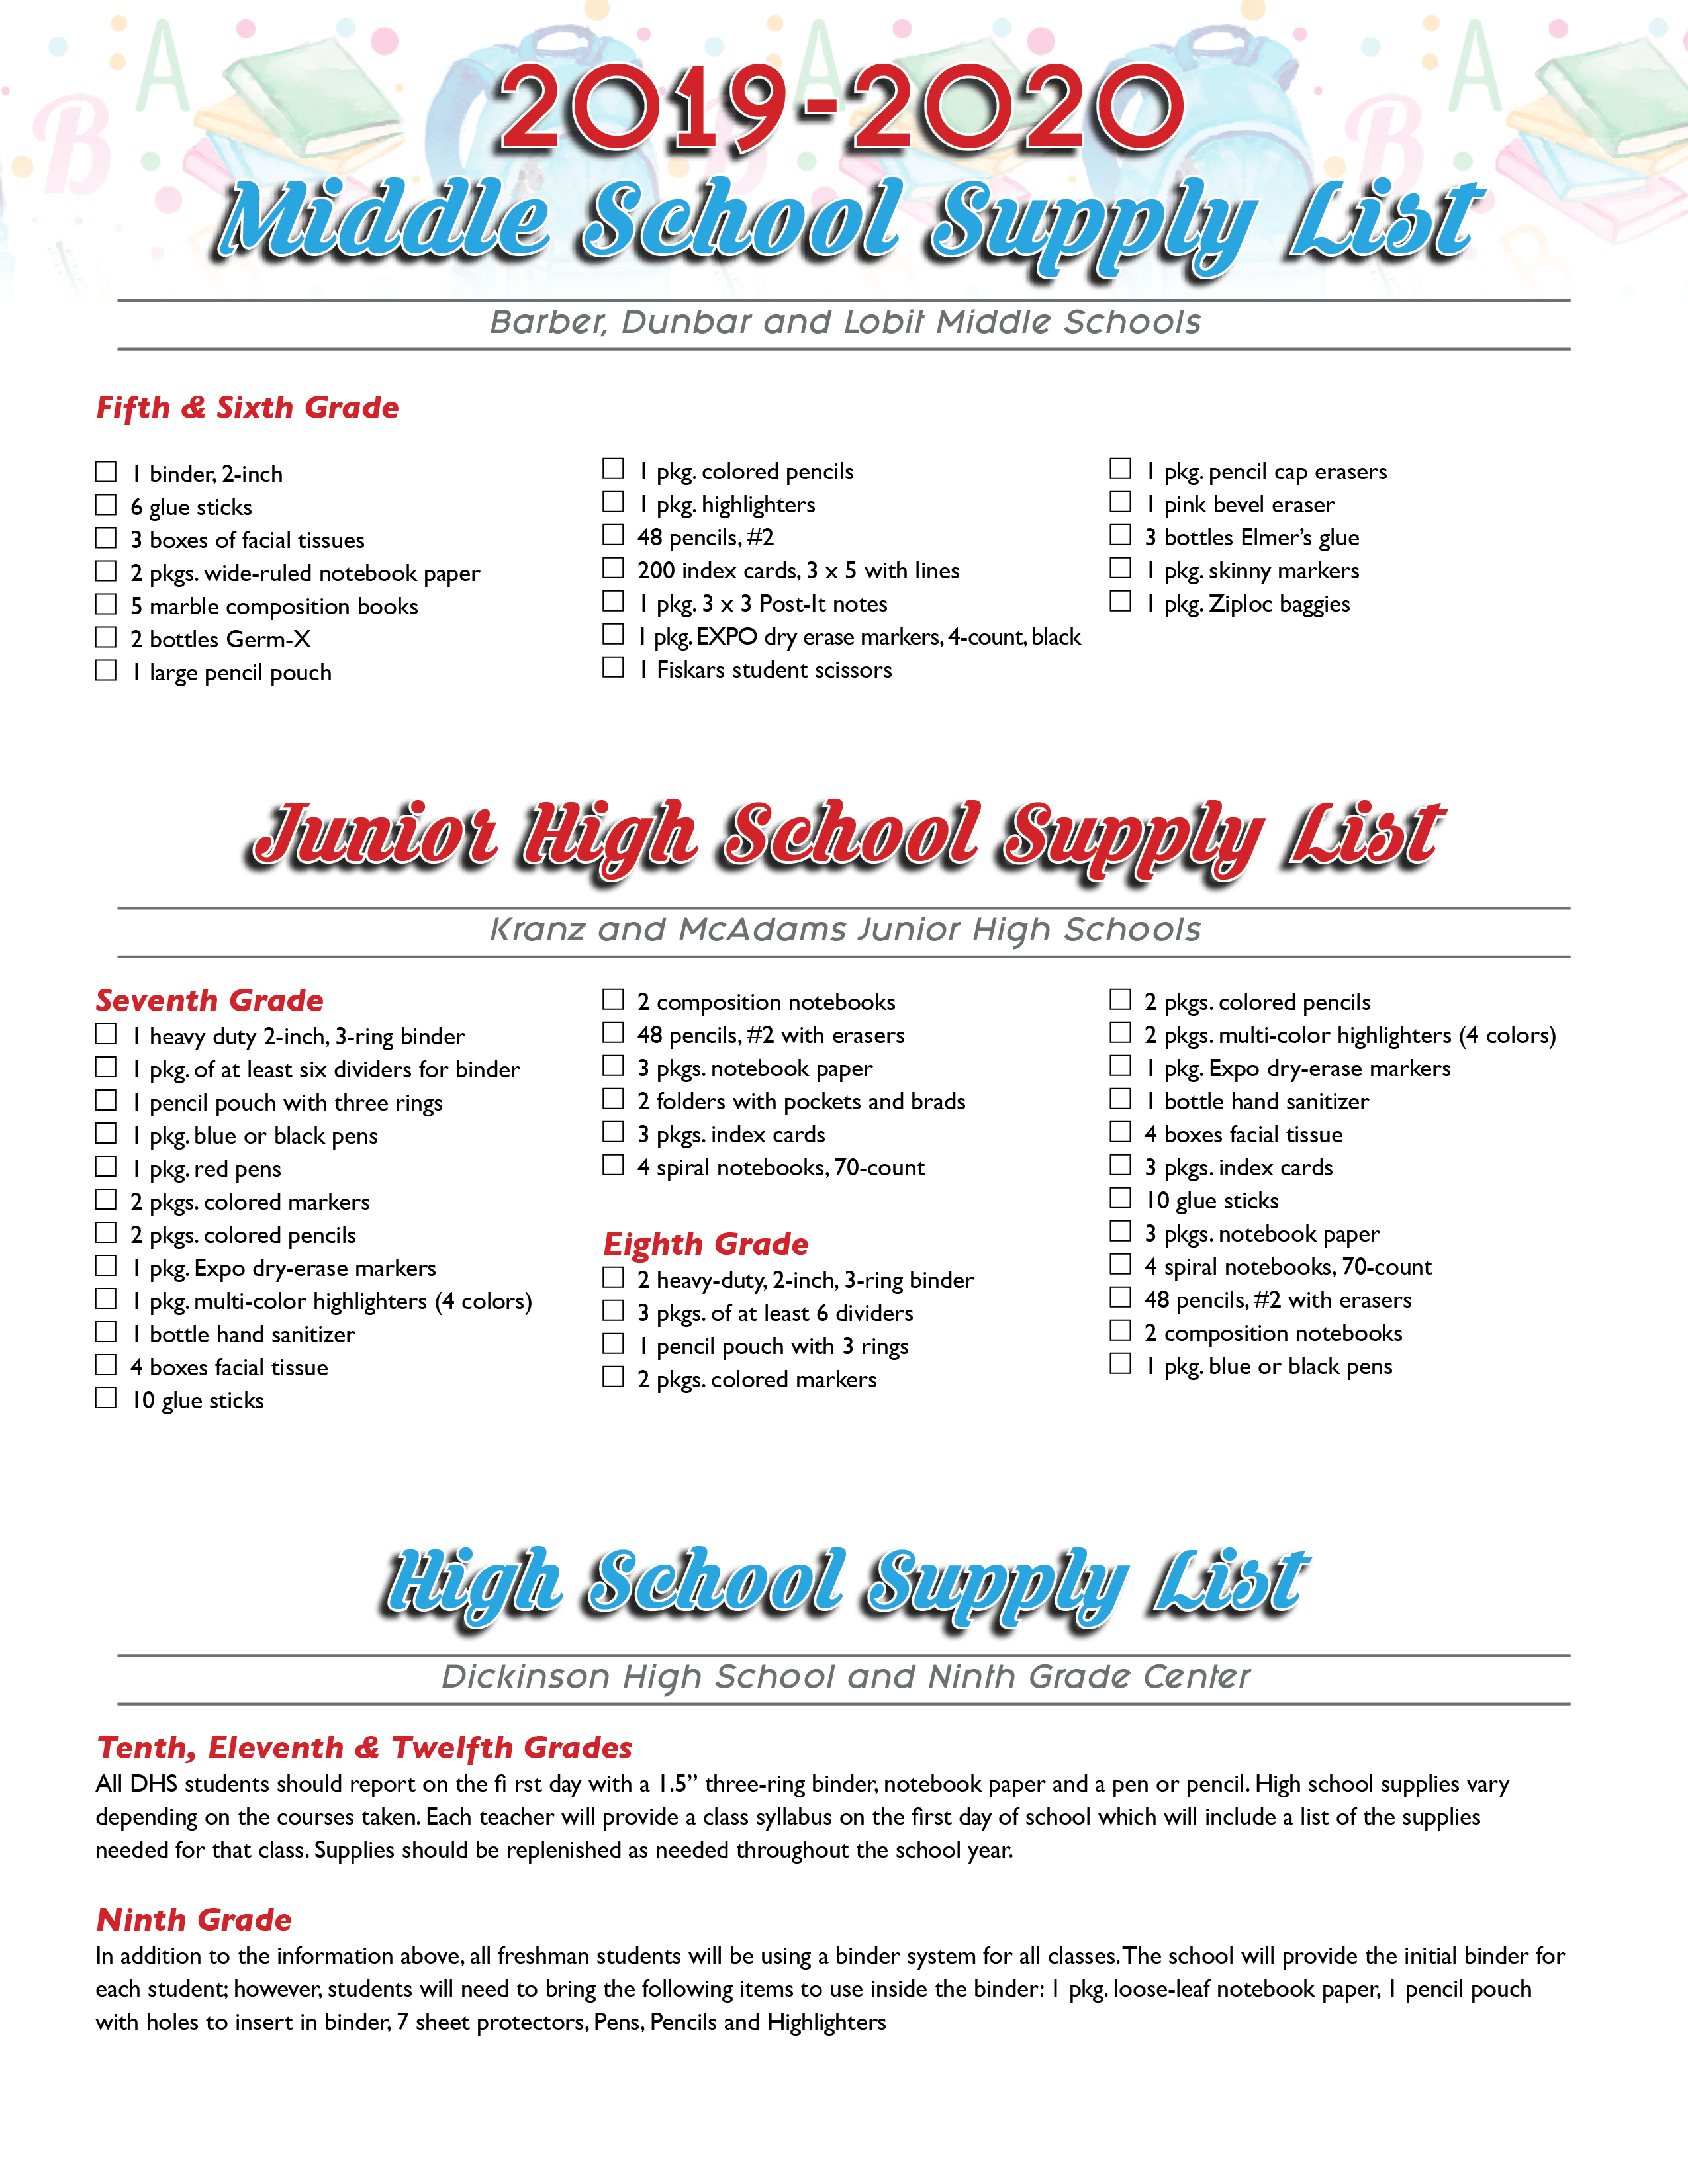 what is the school supply list for 9th grade